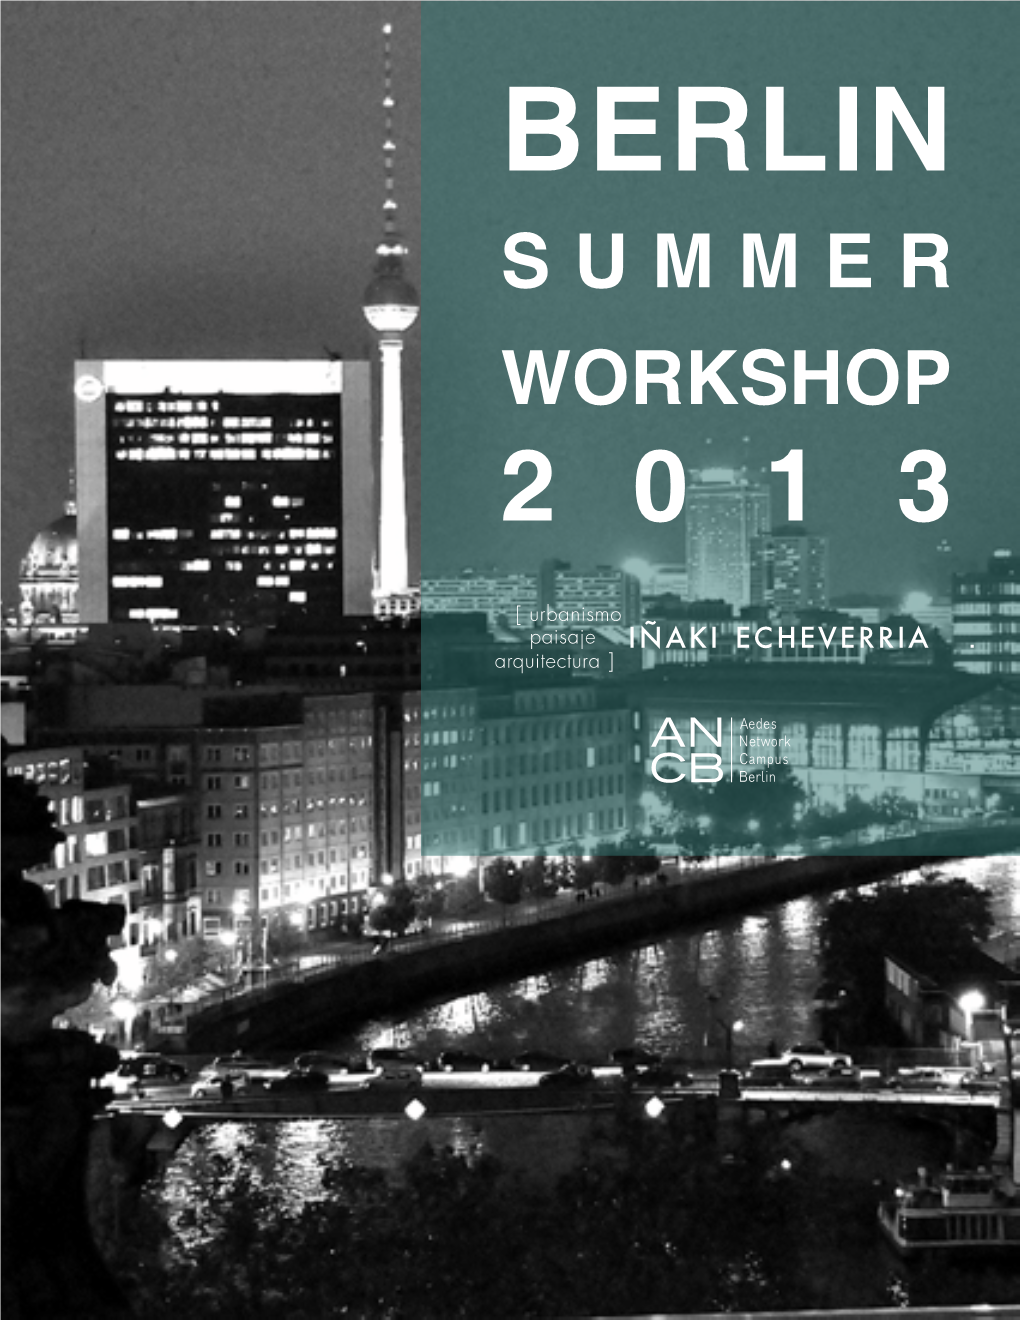 Berlin Summer Workshop 2013 What Is the Bsw @ Ancb?